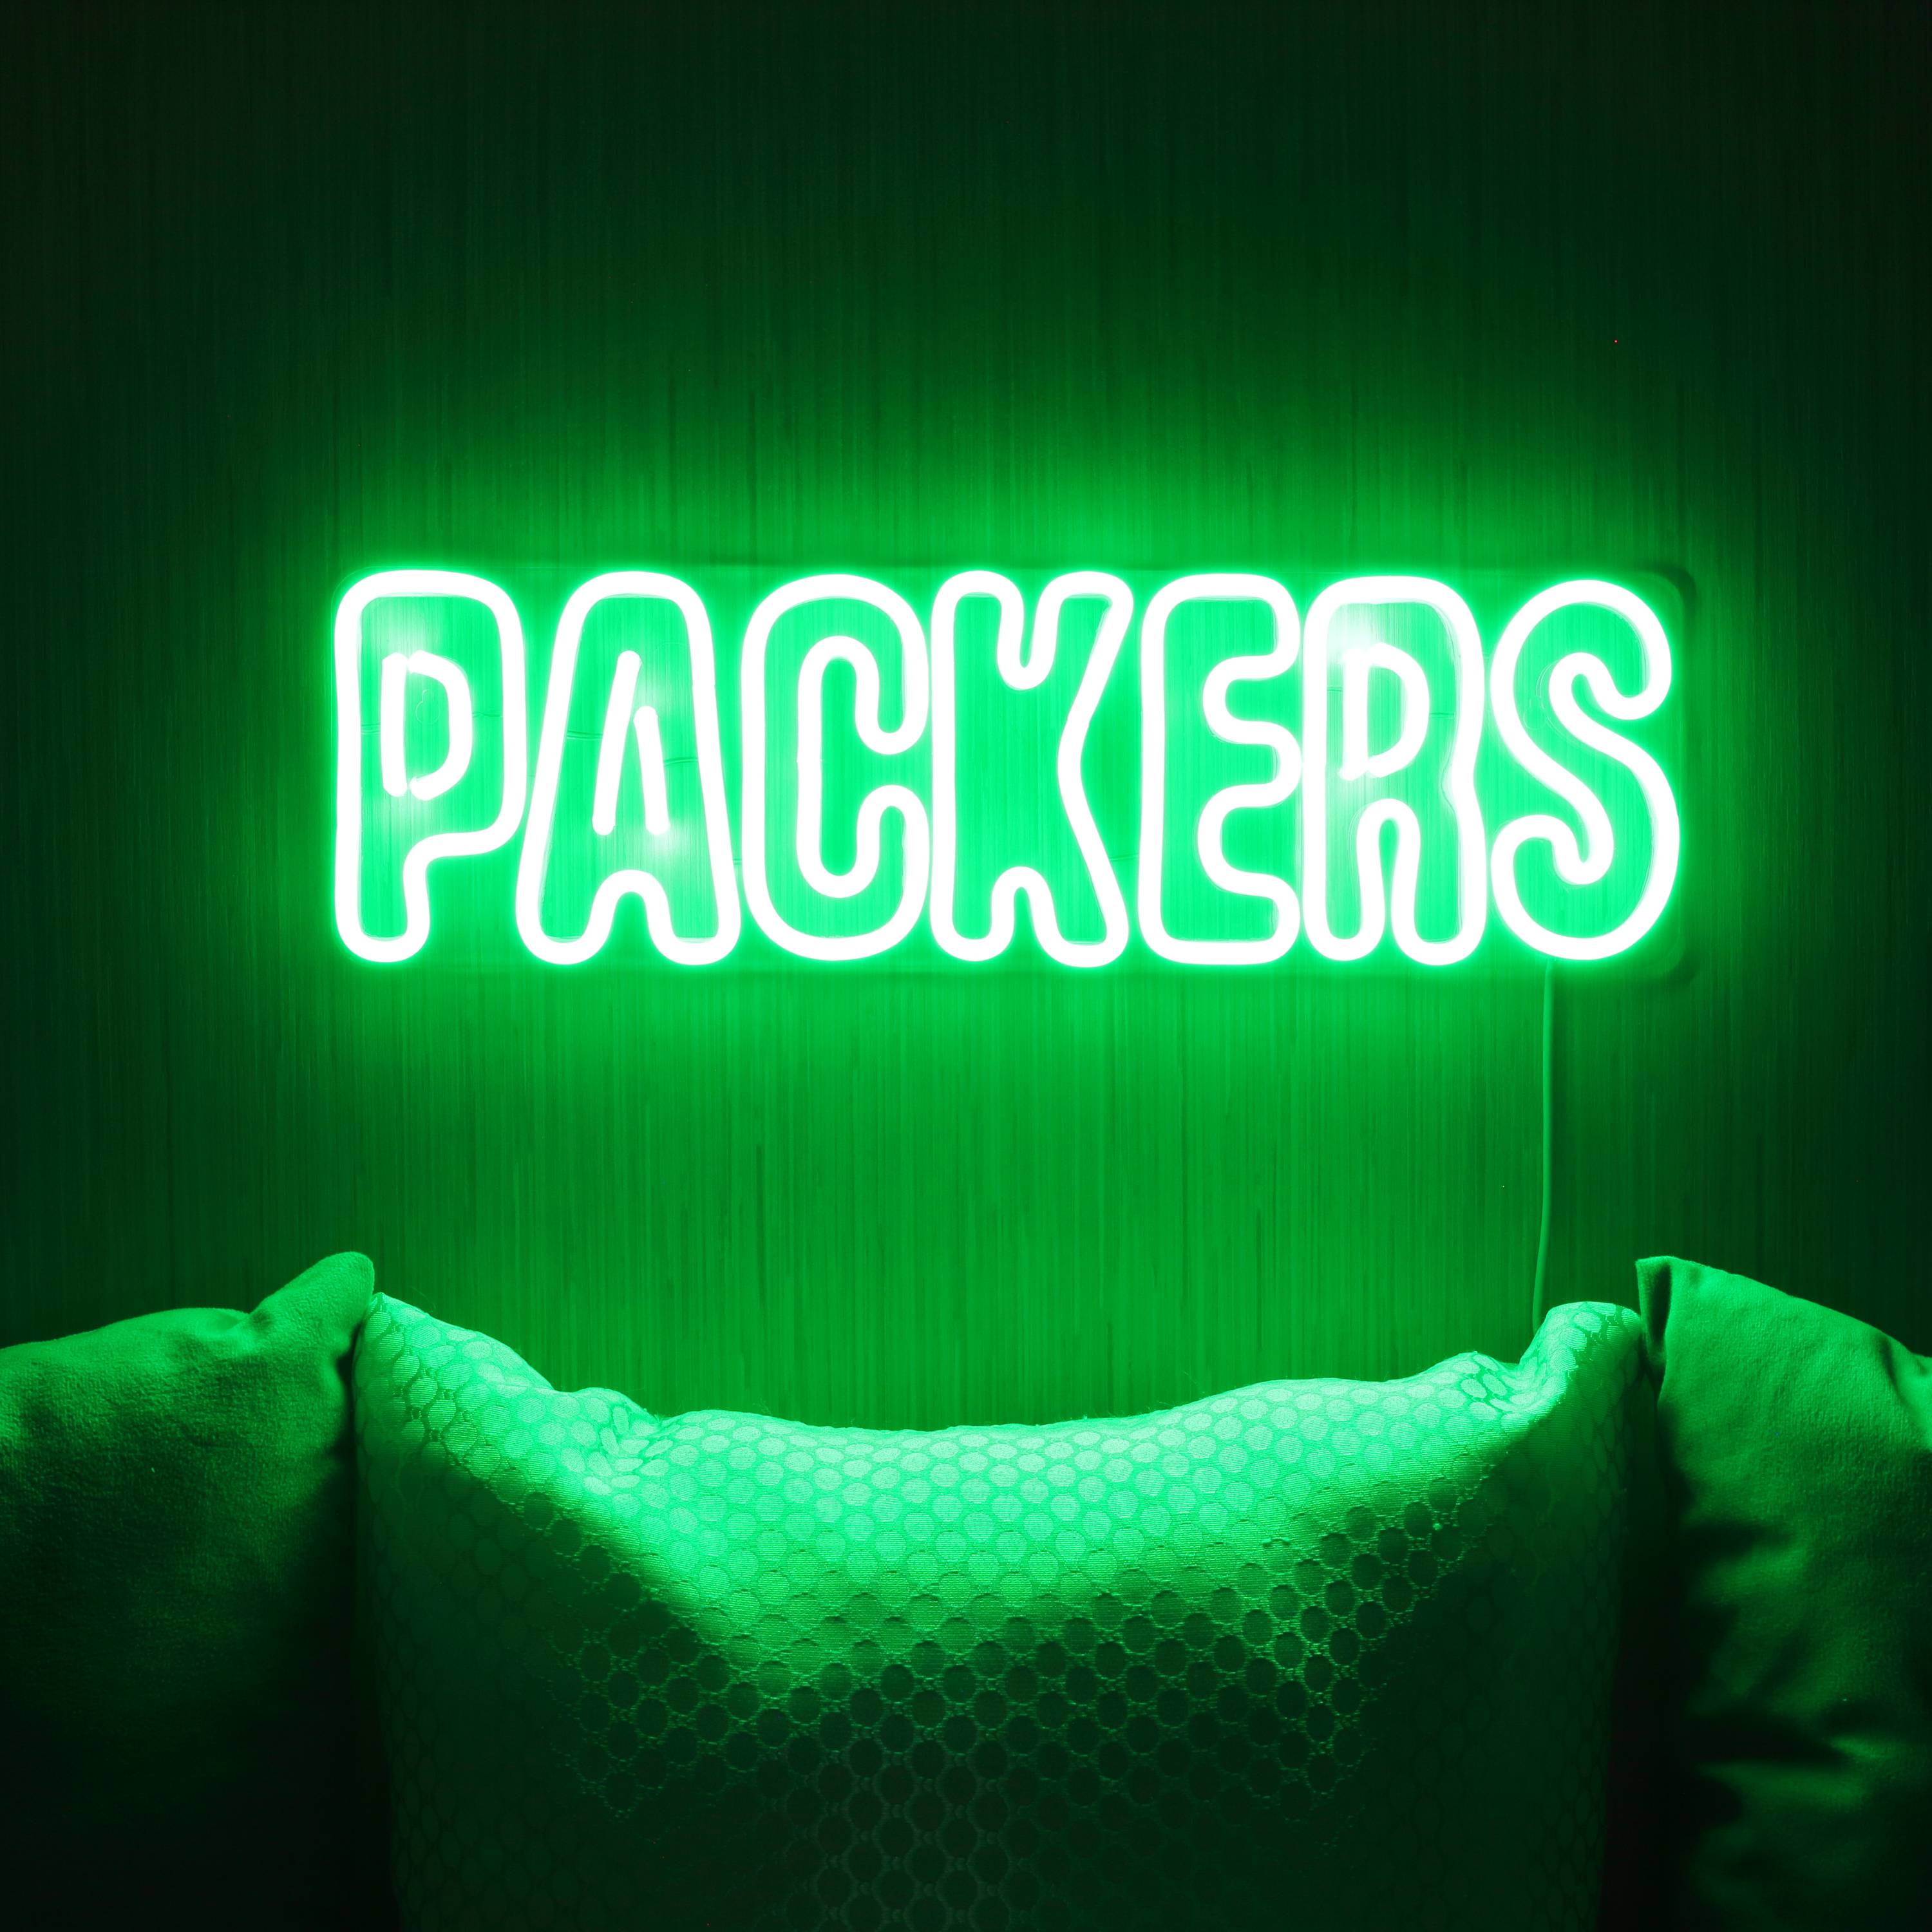 NFL PACKERS Large Flex Neon LED Sign